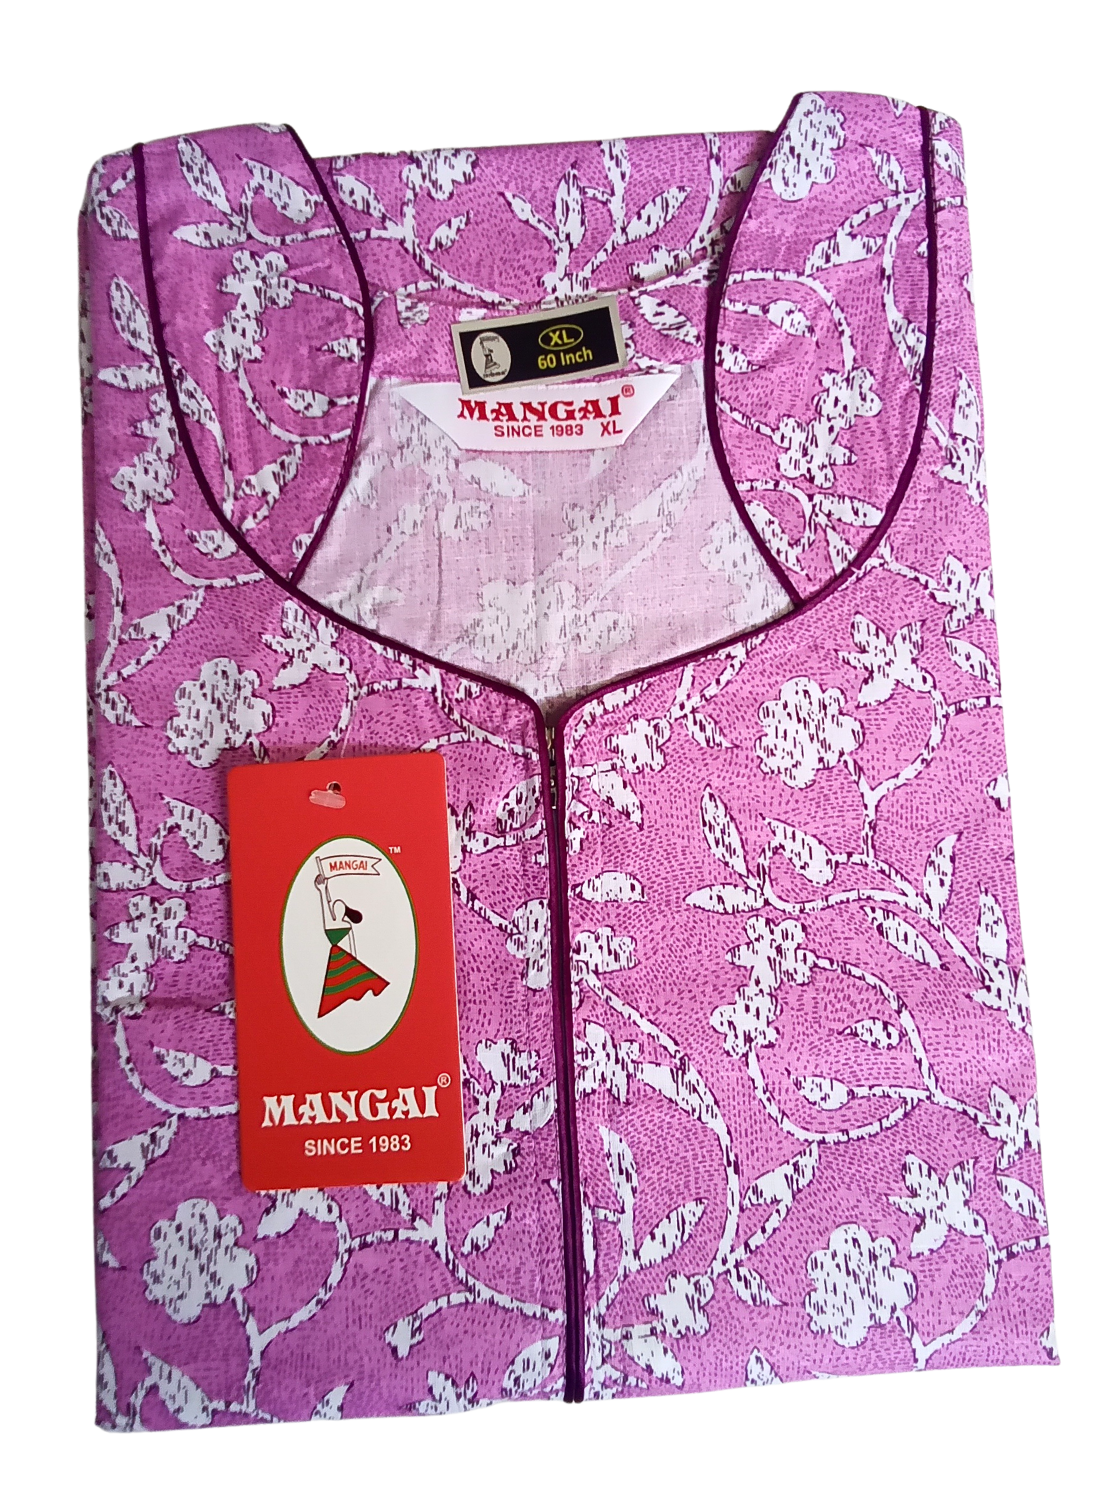 MANGAI New Arrivals Cotton 60Inch Nighties - Fancy Neck | With Side Pocket |Shrinkage Free Nighties | Stylish Collection's for Trendy Women's